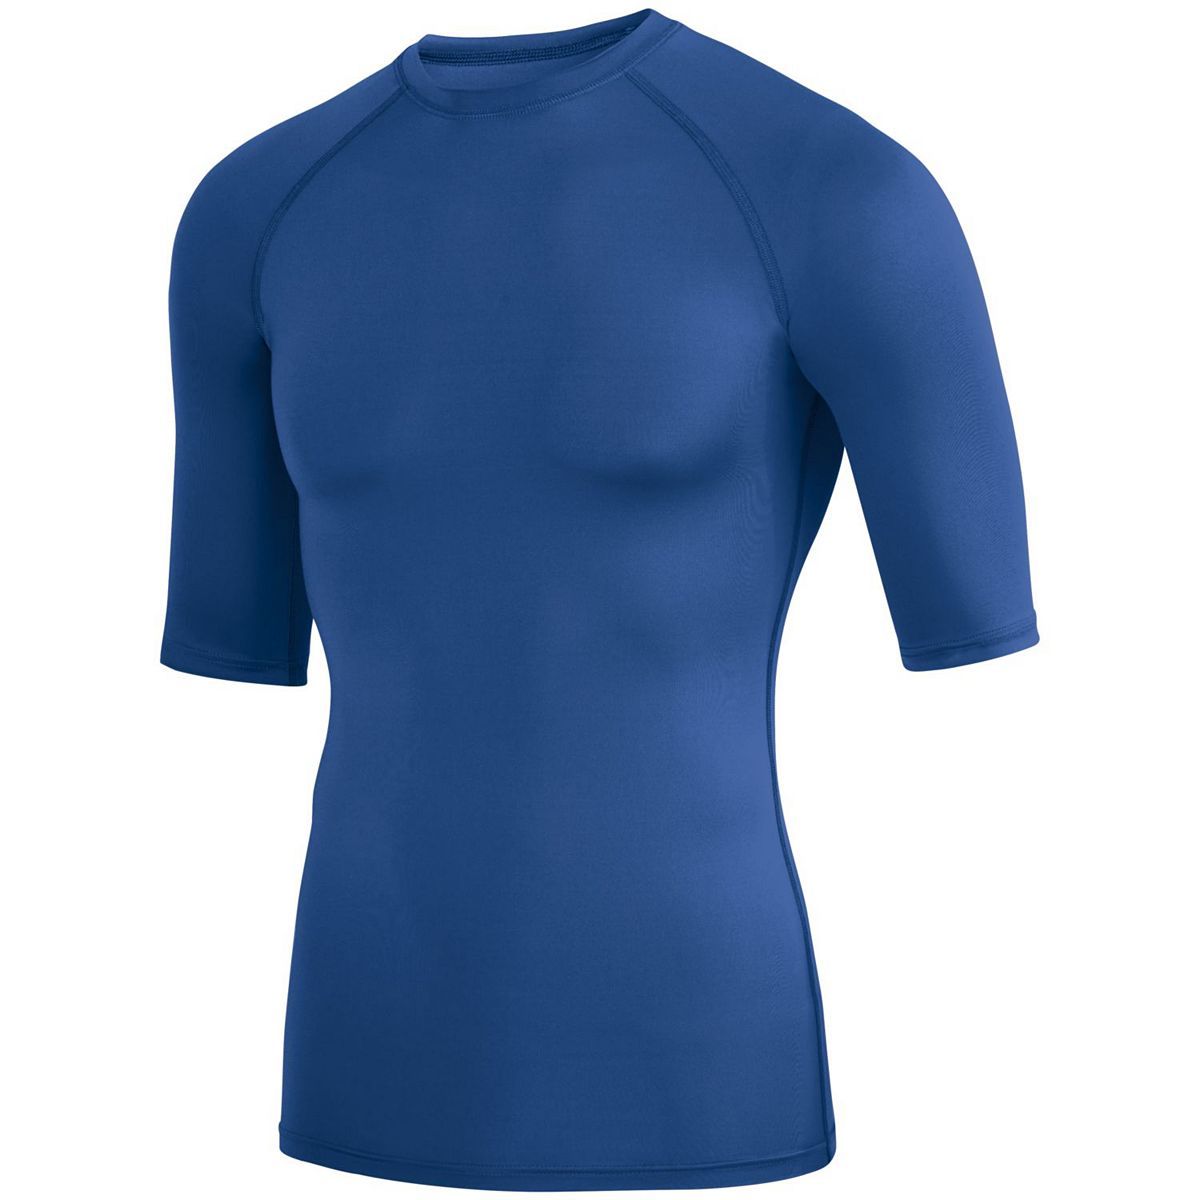 Augusta Sportswear Hyperform Compression Half Sleeve Tee in Royal  -Part of the Adult, Adult-Tee-Shirt, T-Shirts, Augusta-Products, Shirts product lines at KanaleyCreations.com